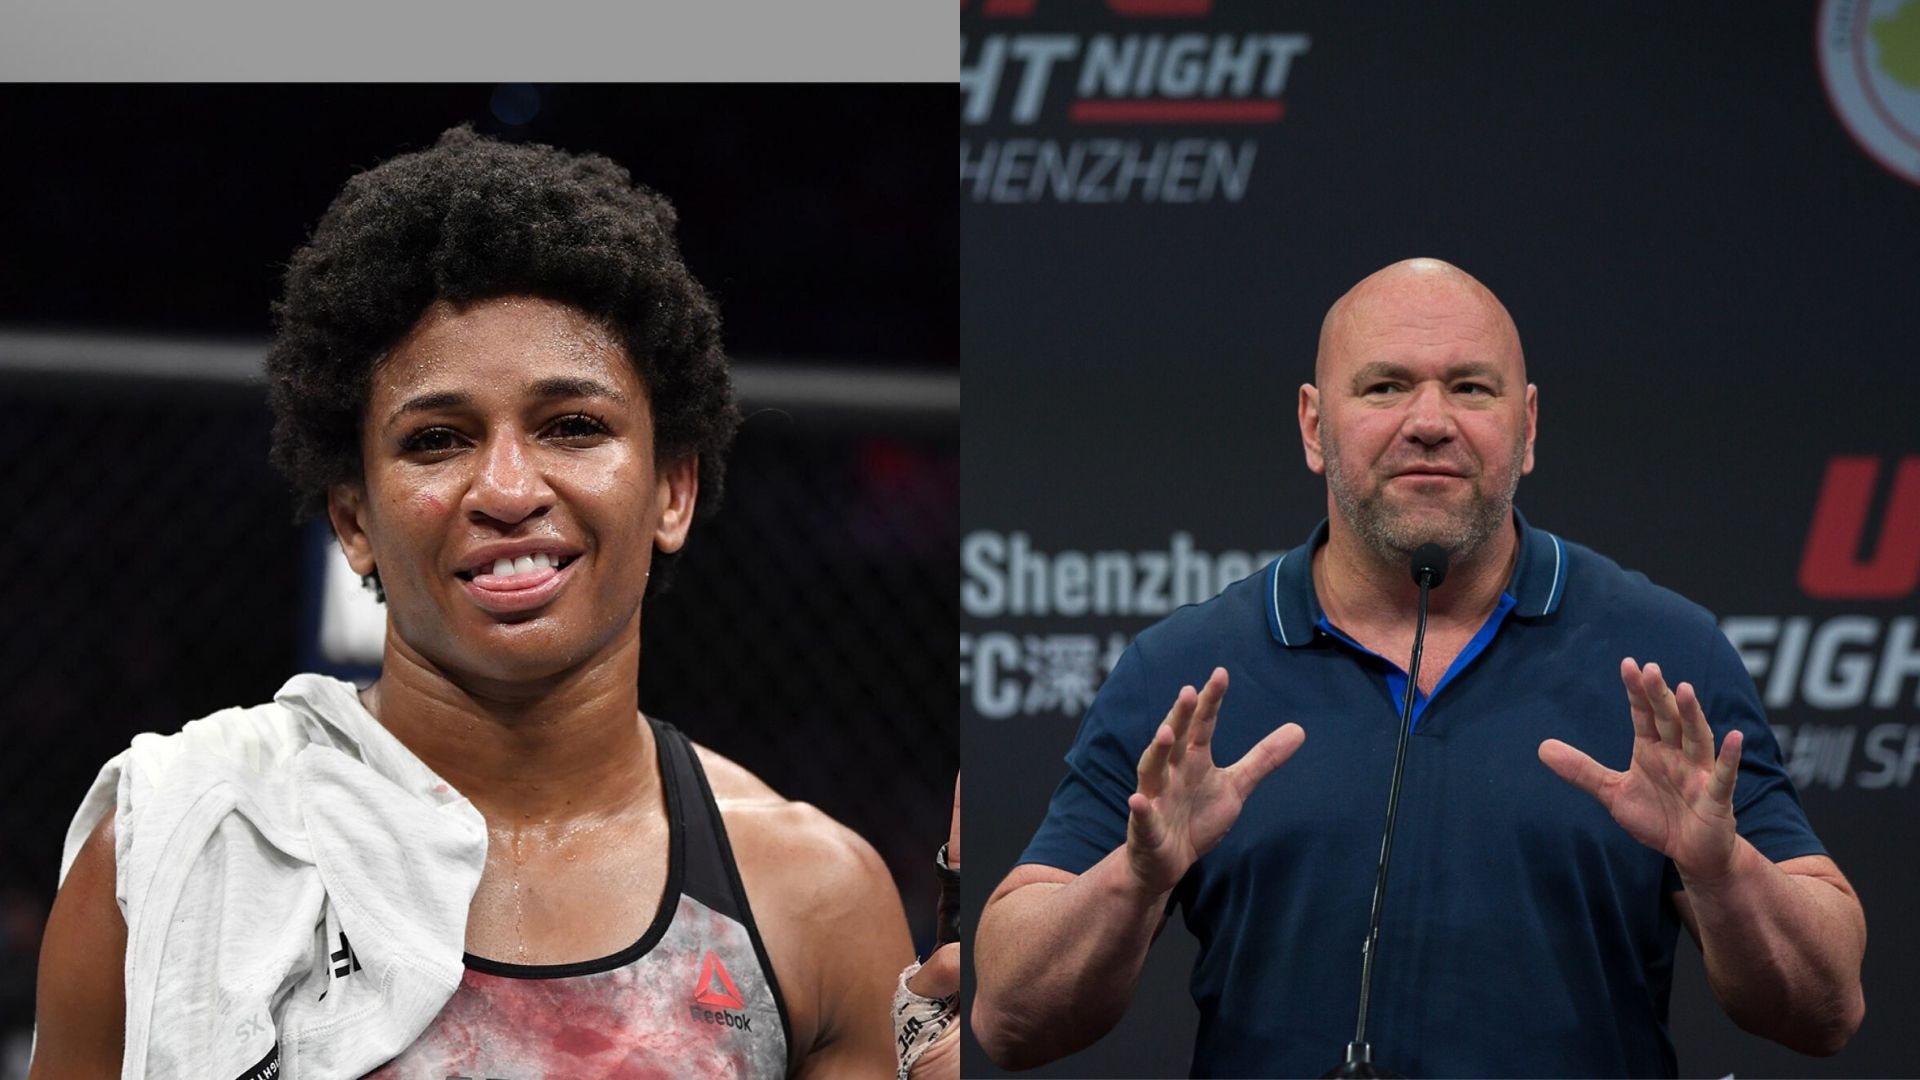 Angela Hill decided to poke some fun at Dana White after his private UFC island reveal